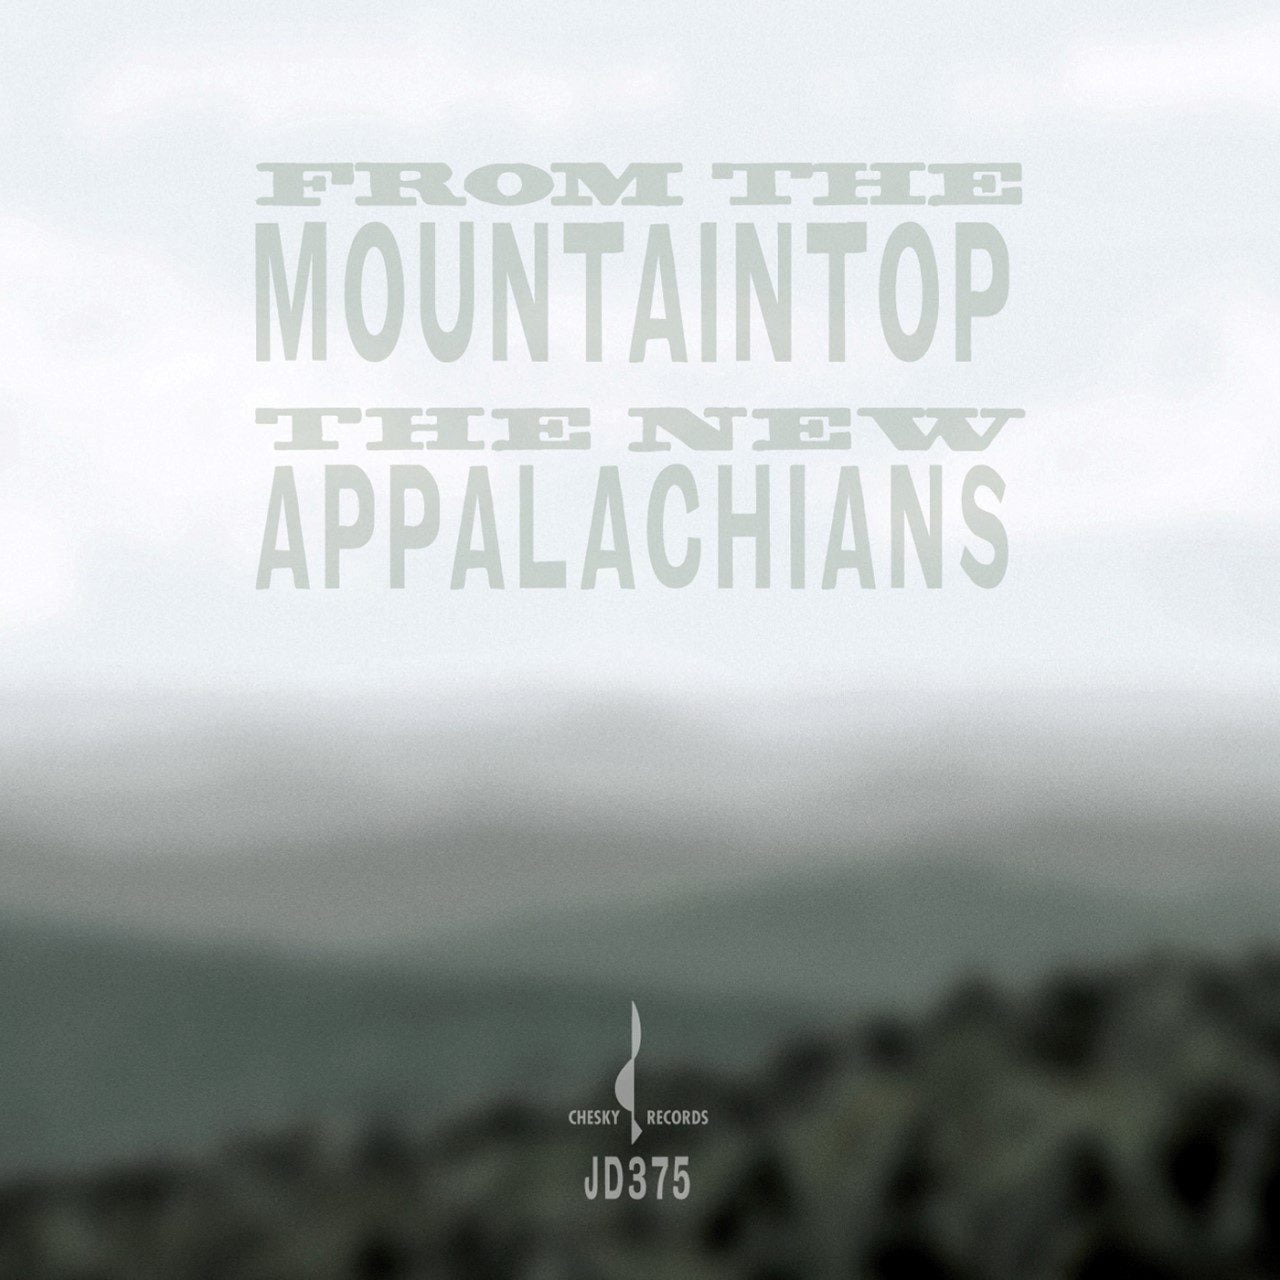 New Appalachians - From The Mountaintop cover album